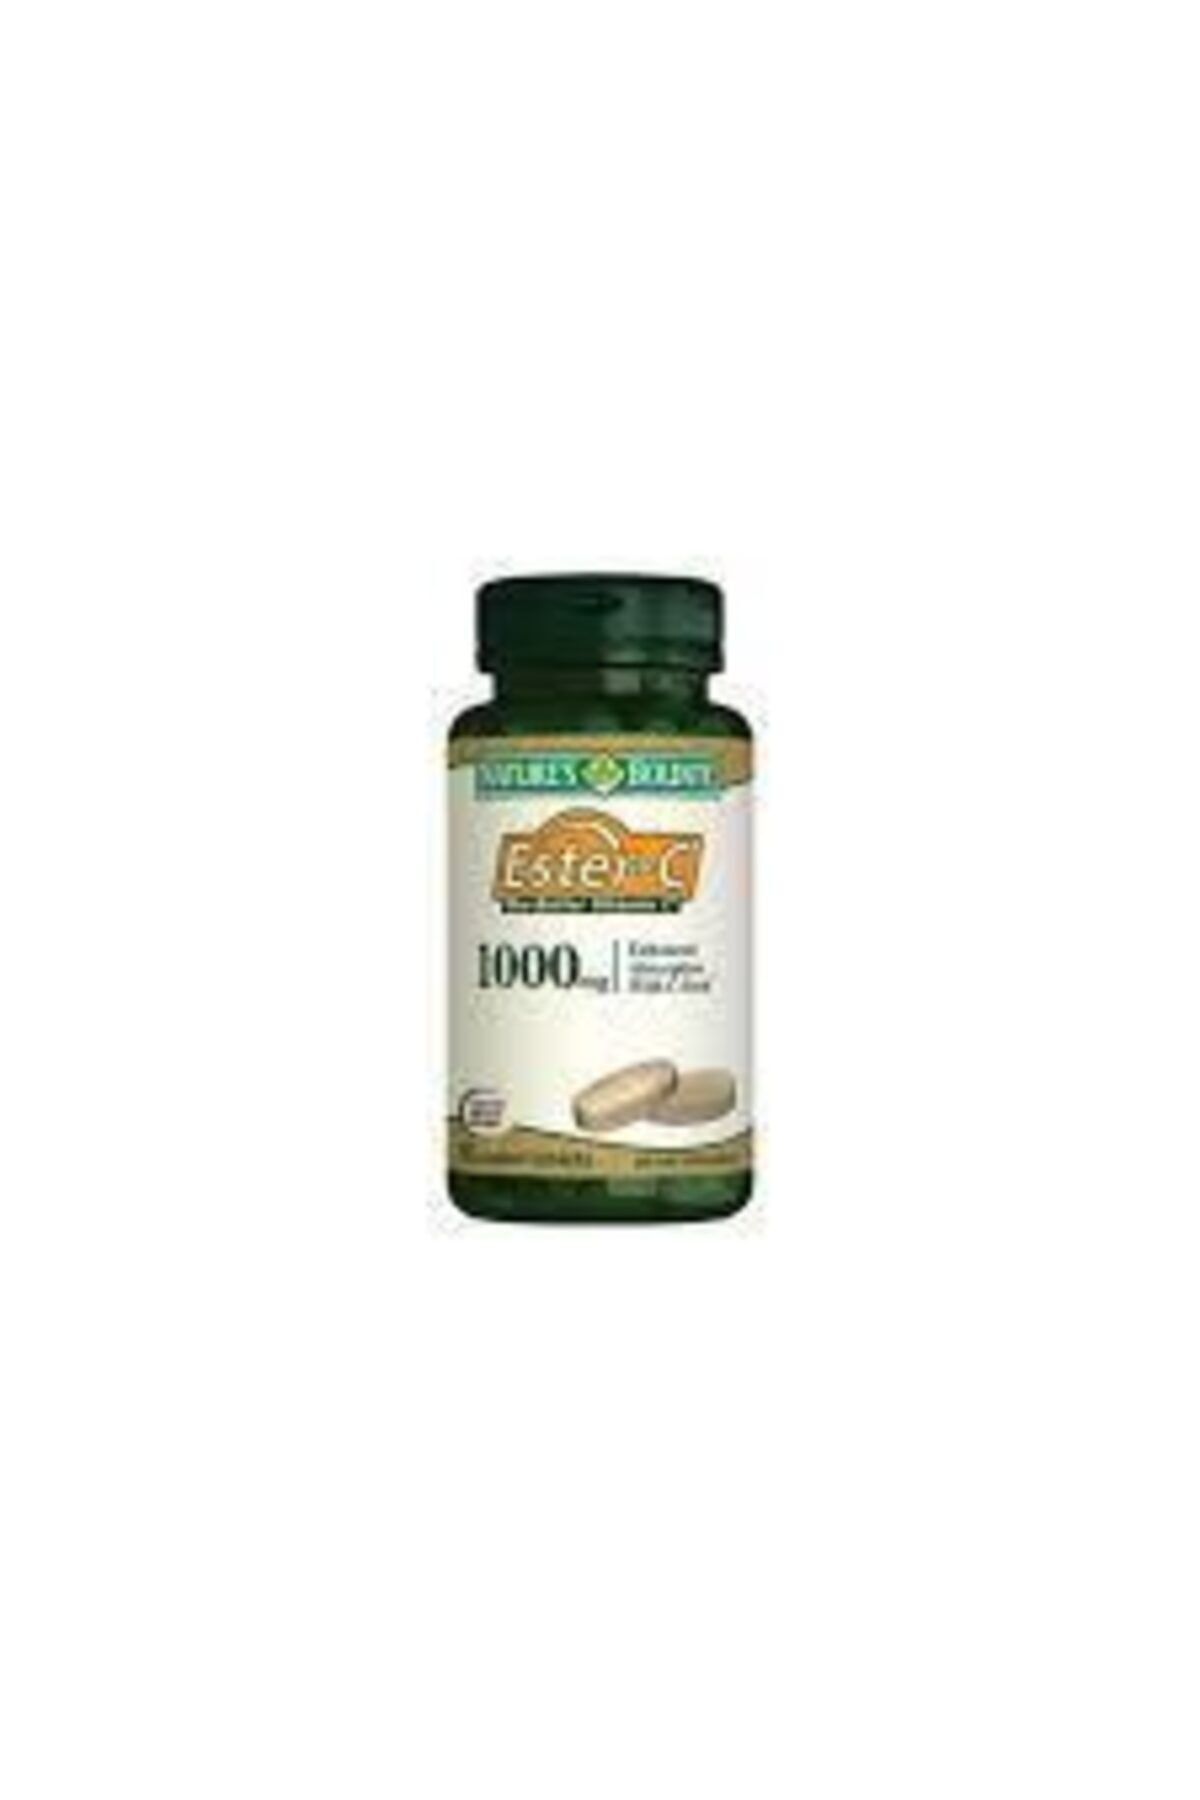 Natures Bounty Ester-c 1000 Mg 60 Tablet